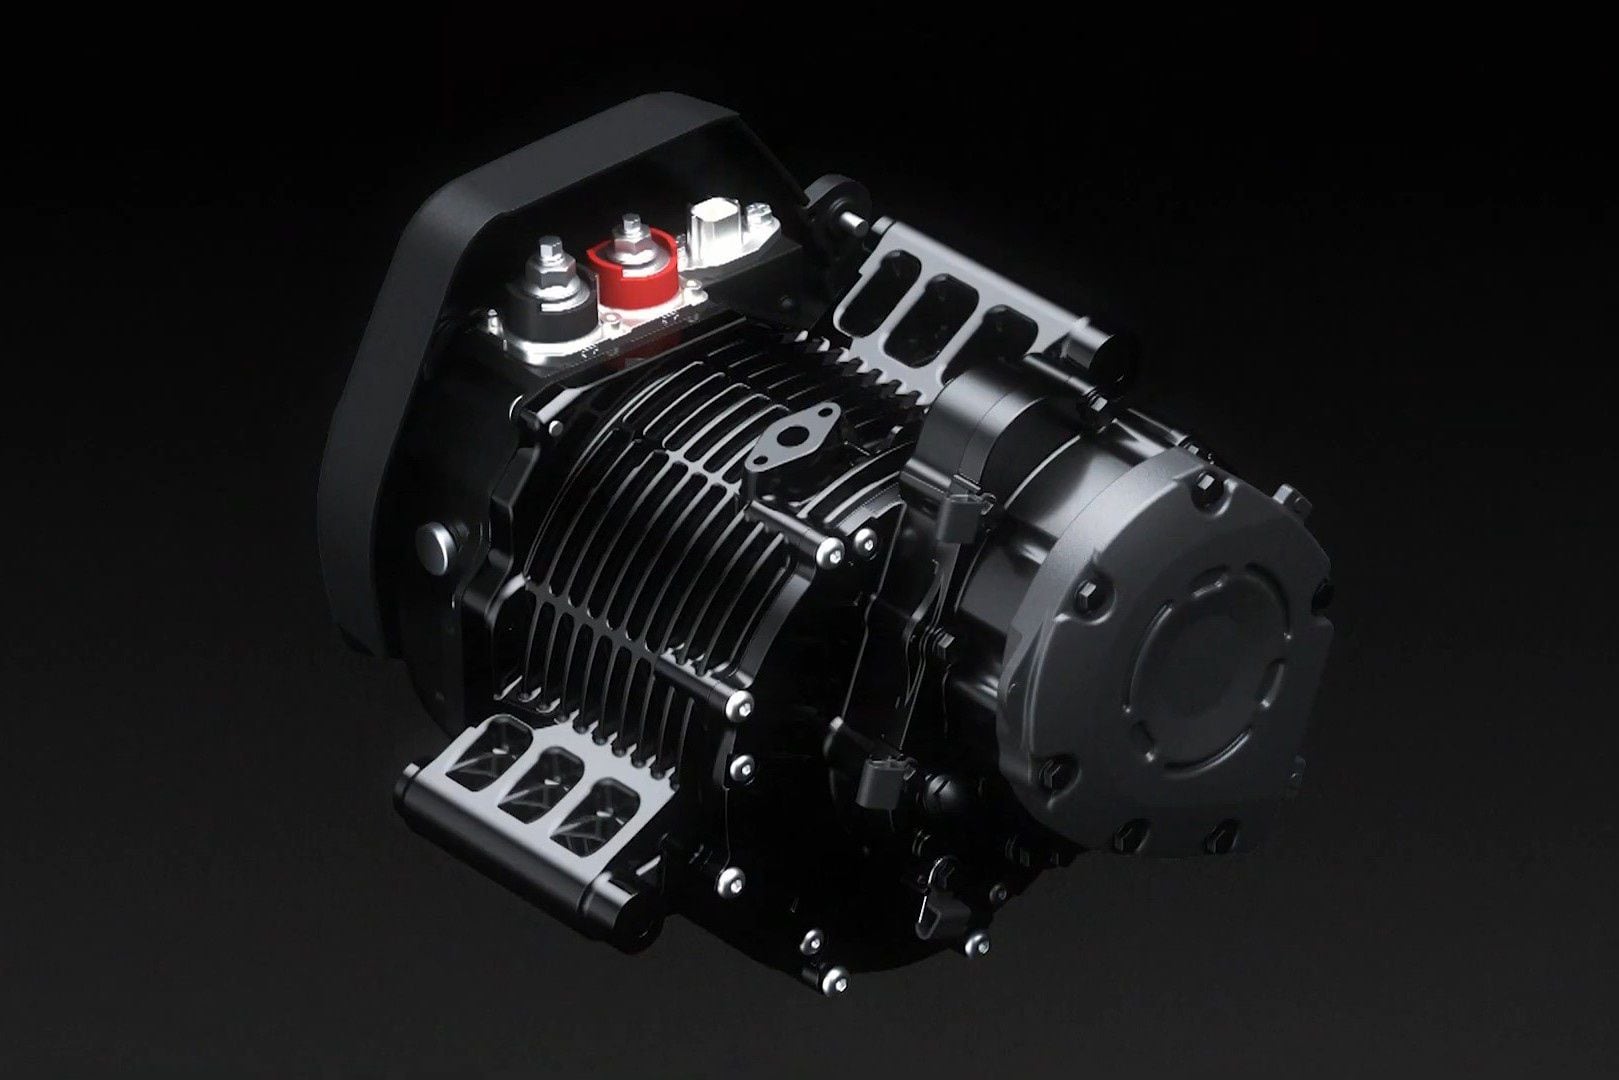 The 11kW motor that will power Kawasaki’s first two electric motorcycles.